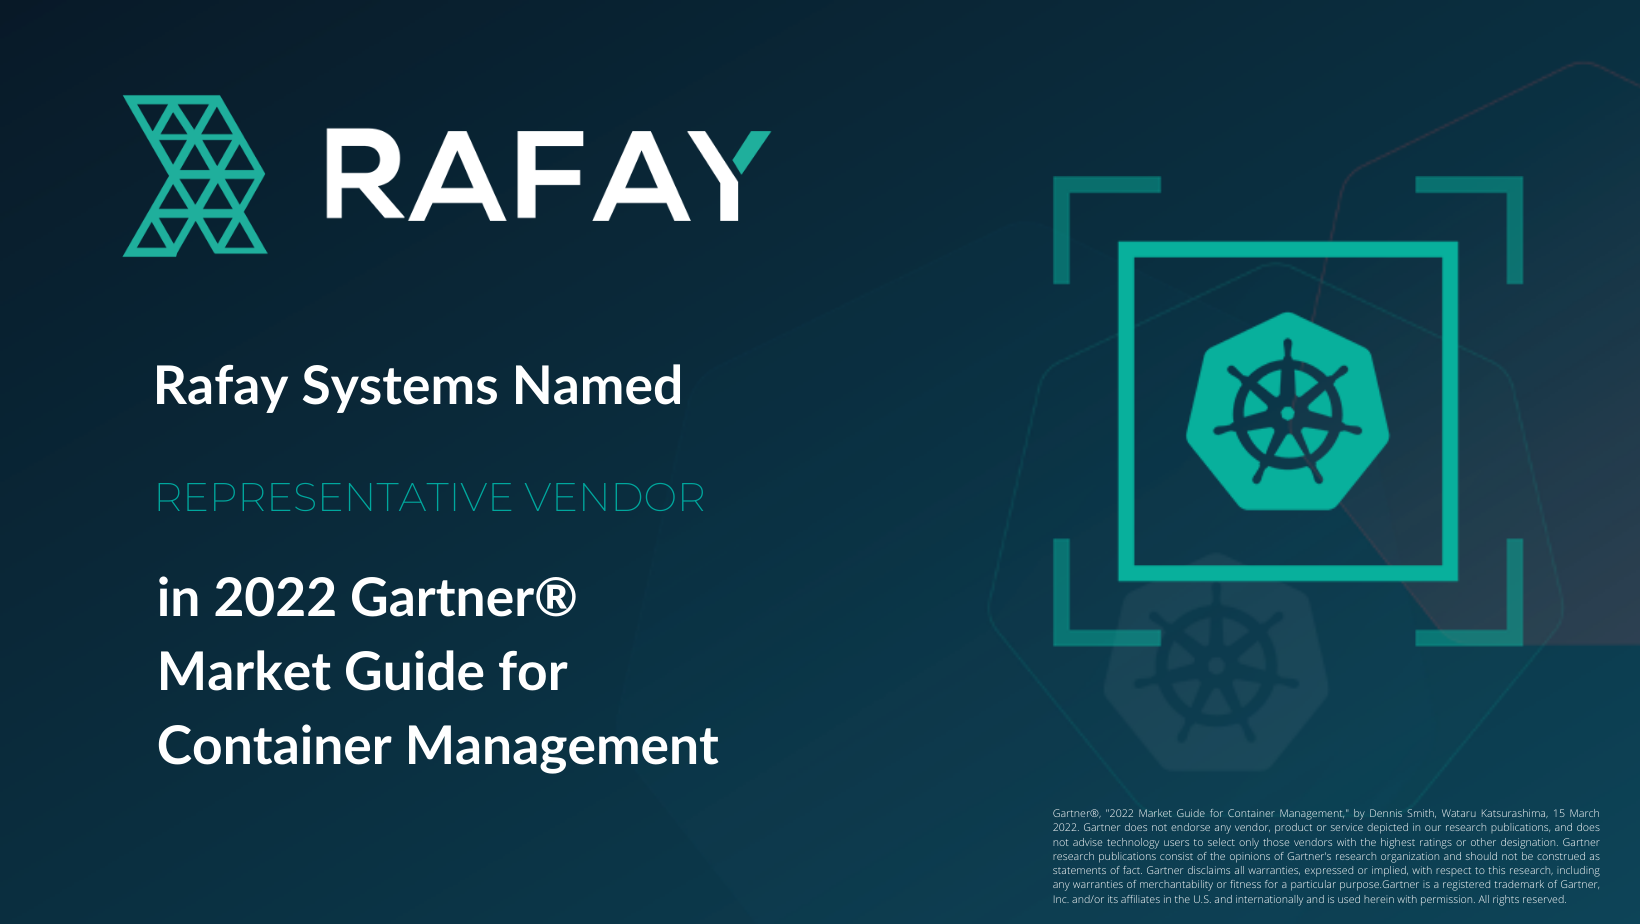 Image for Rafay Systems has been recognized as a Representative Vendor in the 2022 Gartner® Market Guide for Container Management